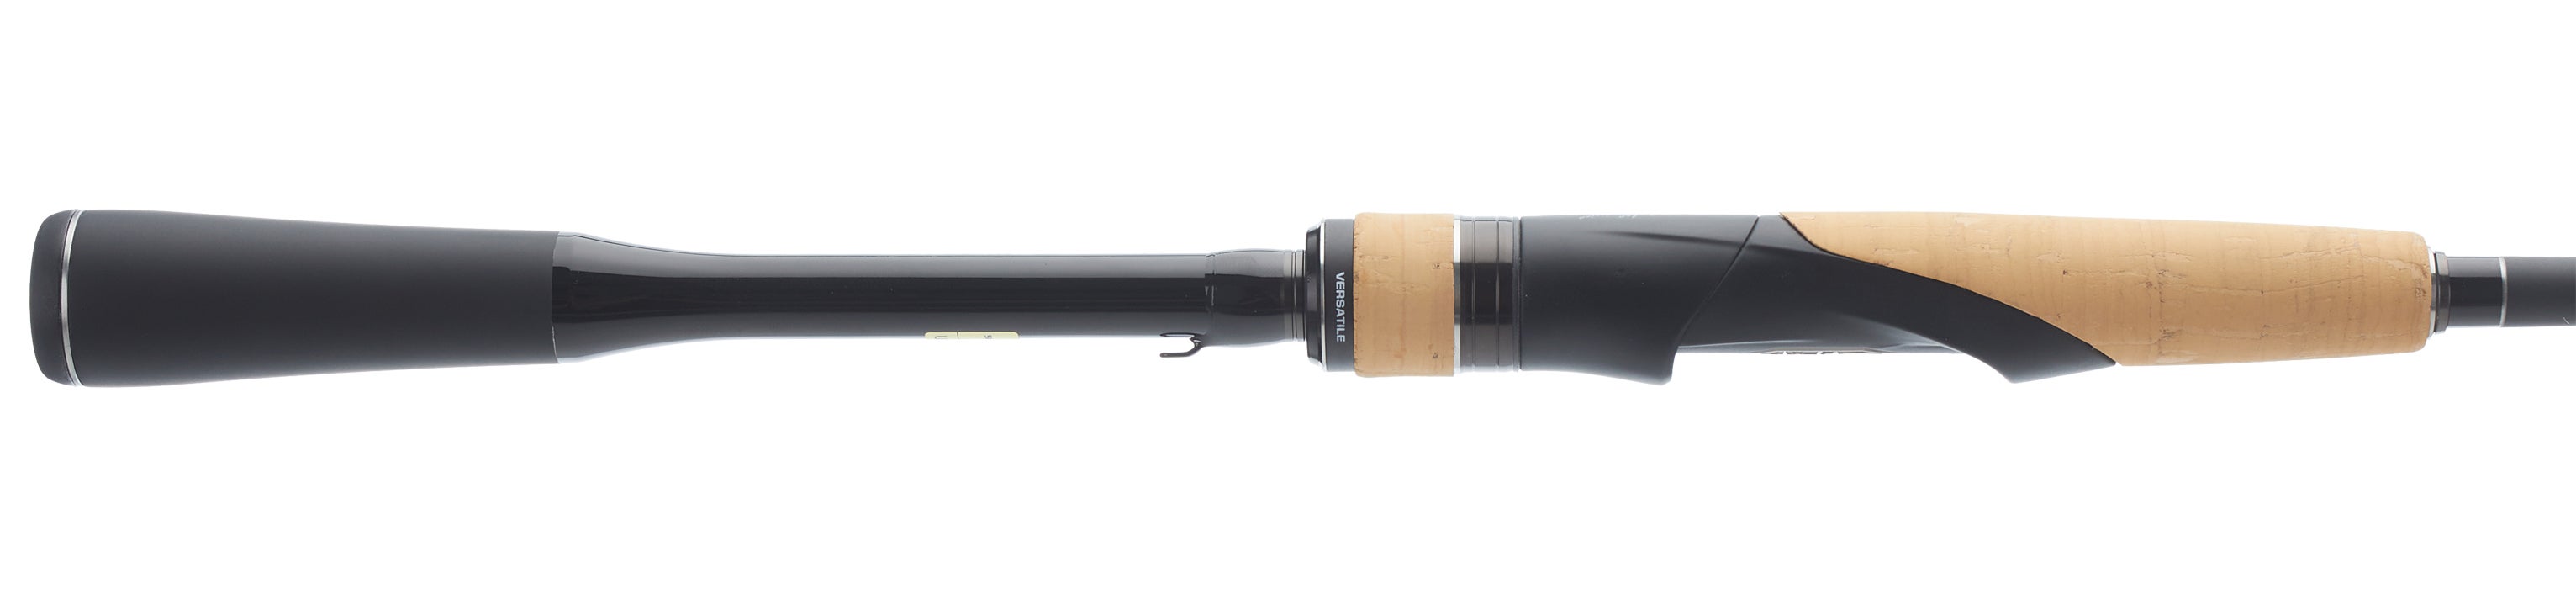 Shimano Expride B Spinning Rods - Tackle Warehouse